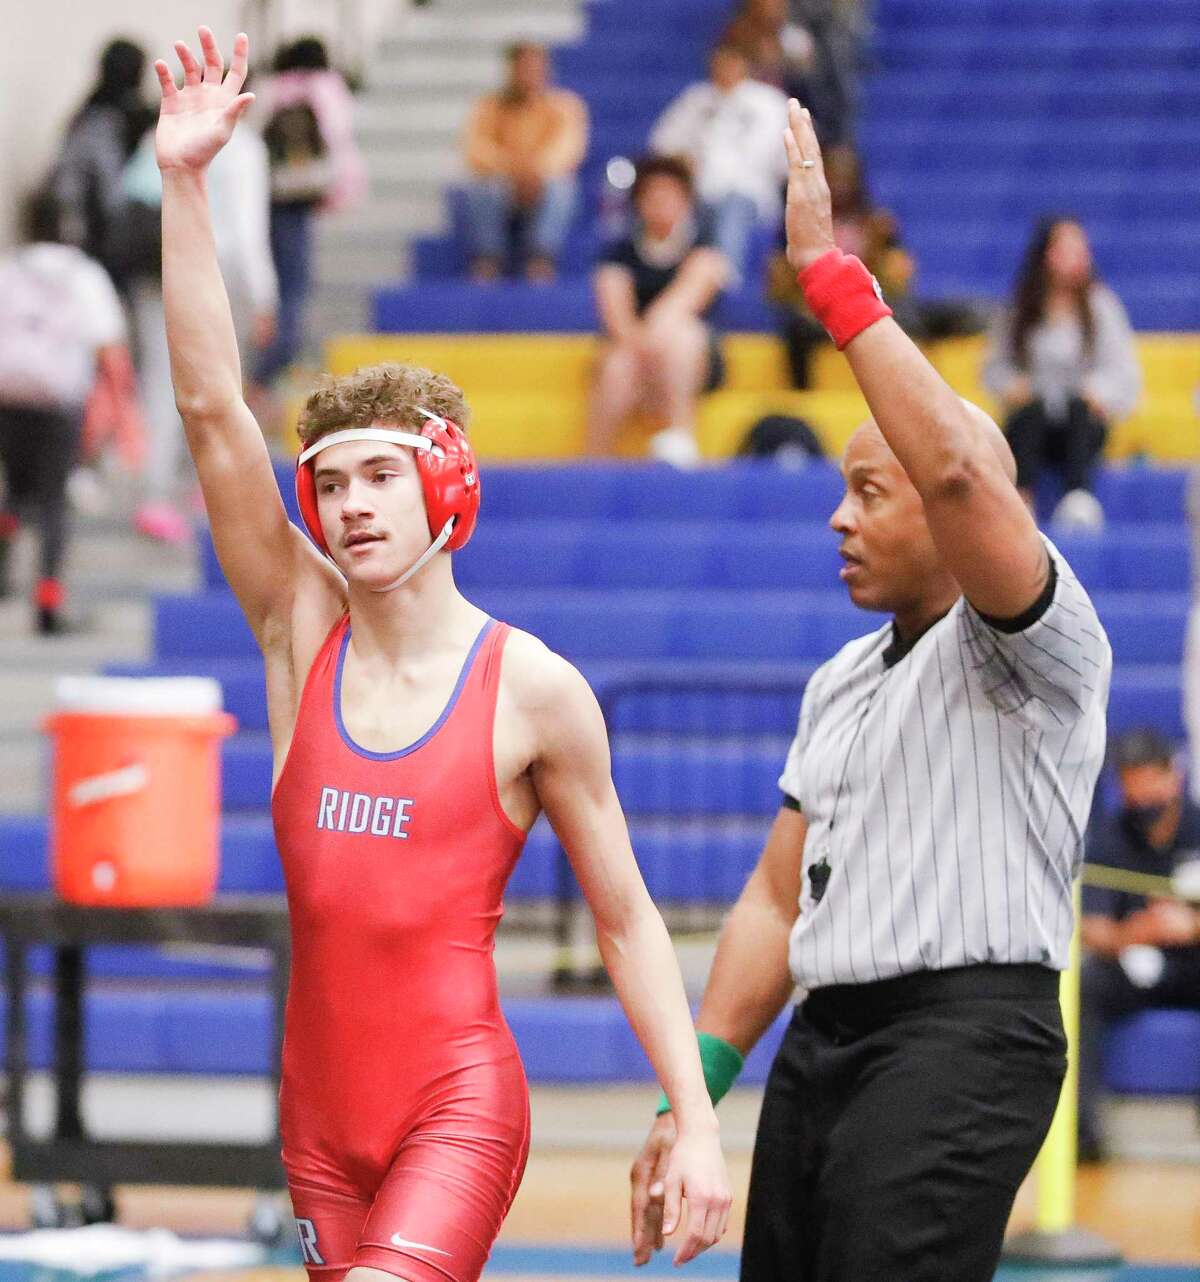 Manuel Rueben of Oak Ridge defeated Vanden Johnson of Willis in a 126-pound bout during the District 8-6A wrestling championships at Klein High School, Tuesday, Feb. 1, 2022, in Spring.